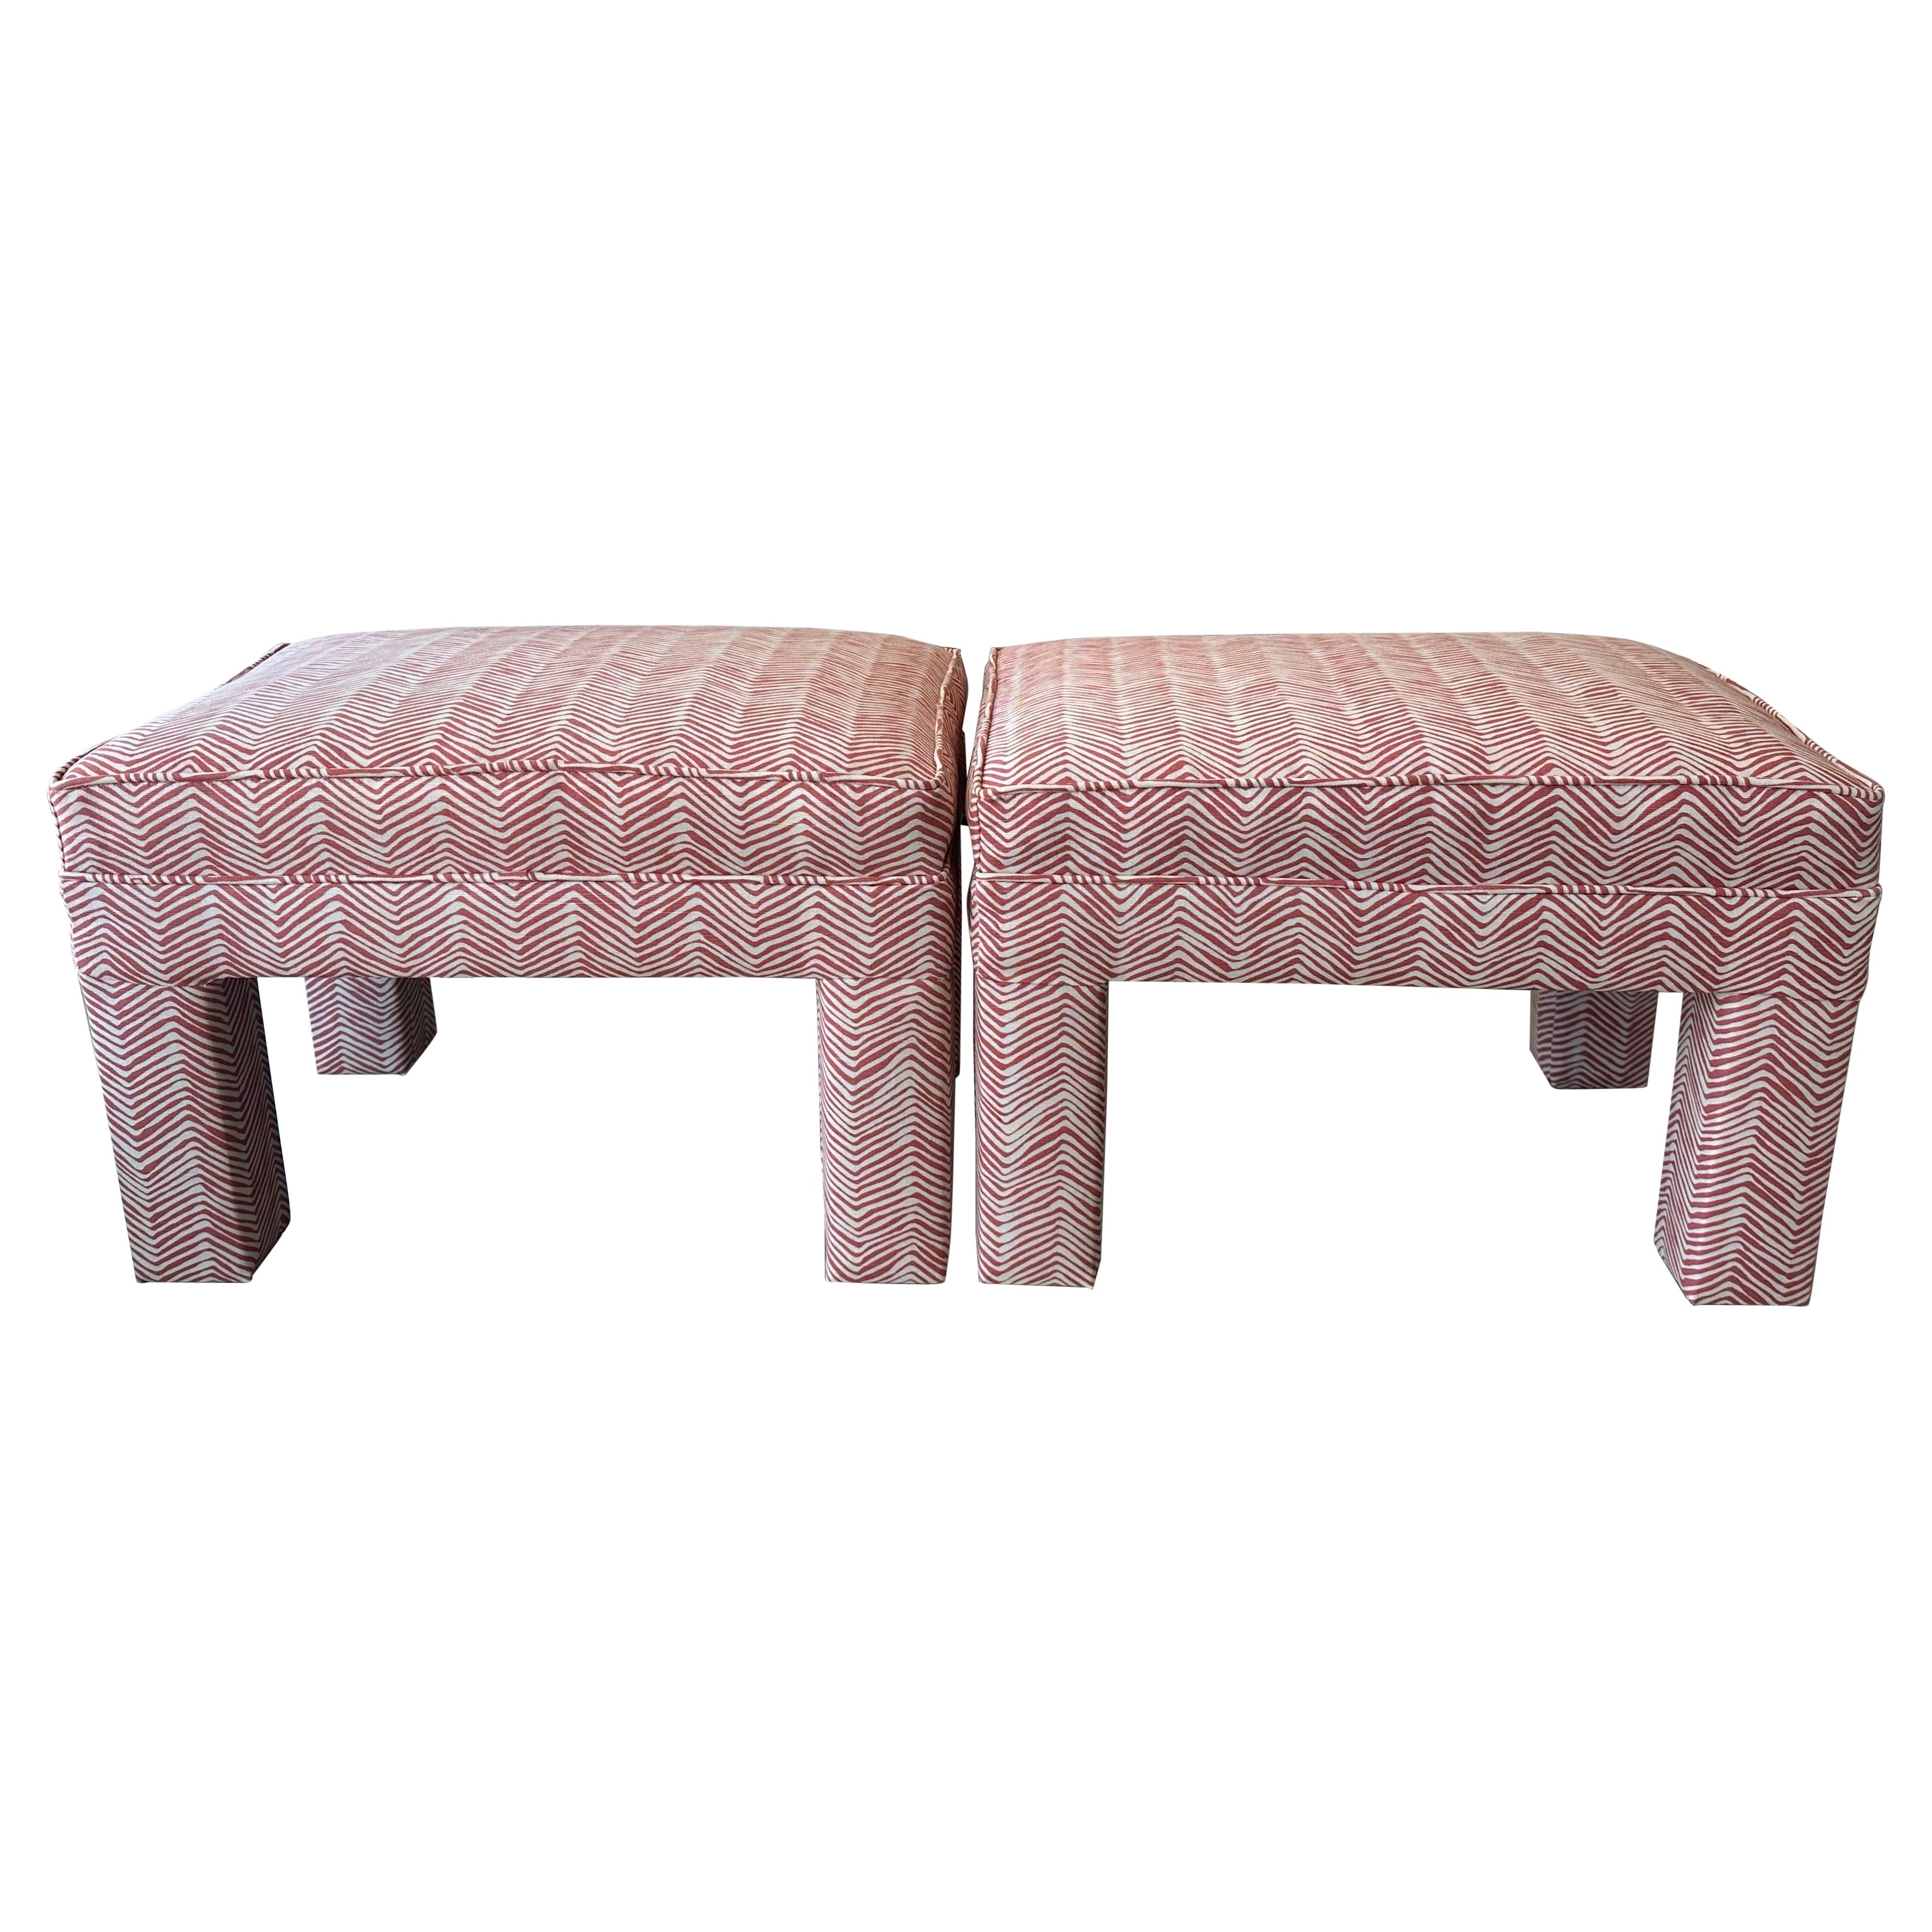 Vintage Pair Parsons Benches Stools Ottomans Newly Upholstered Coral Quadrille For Sale